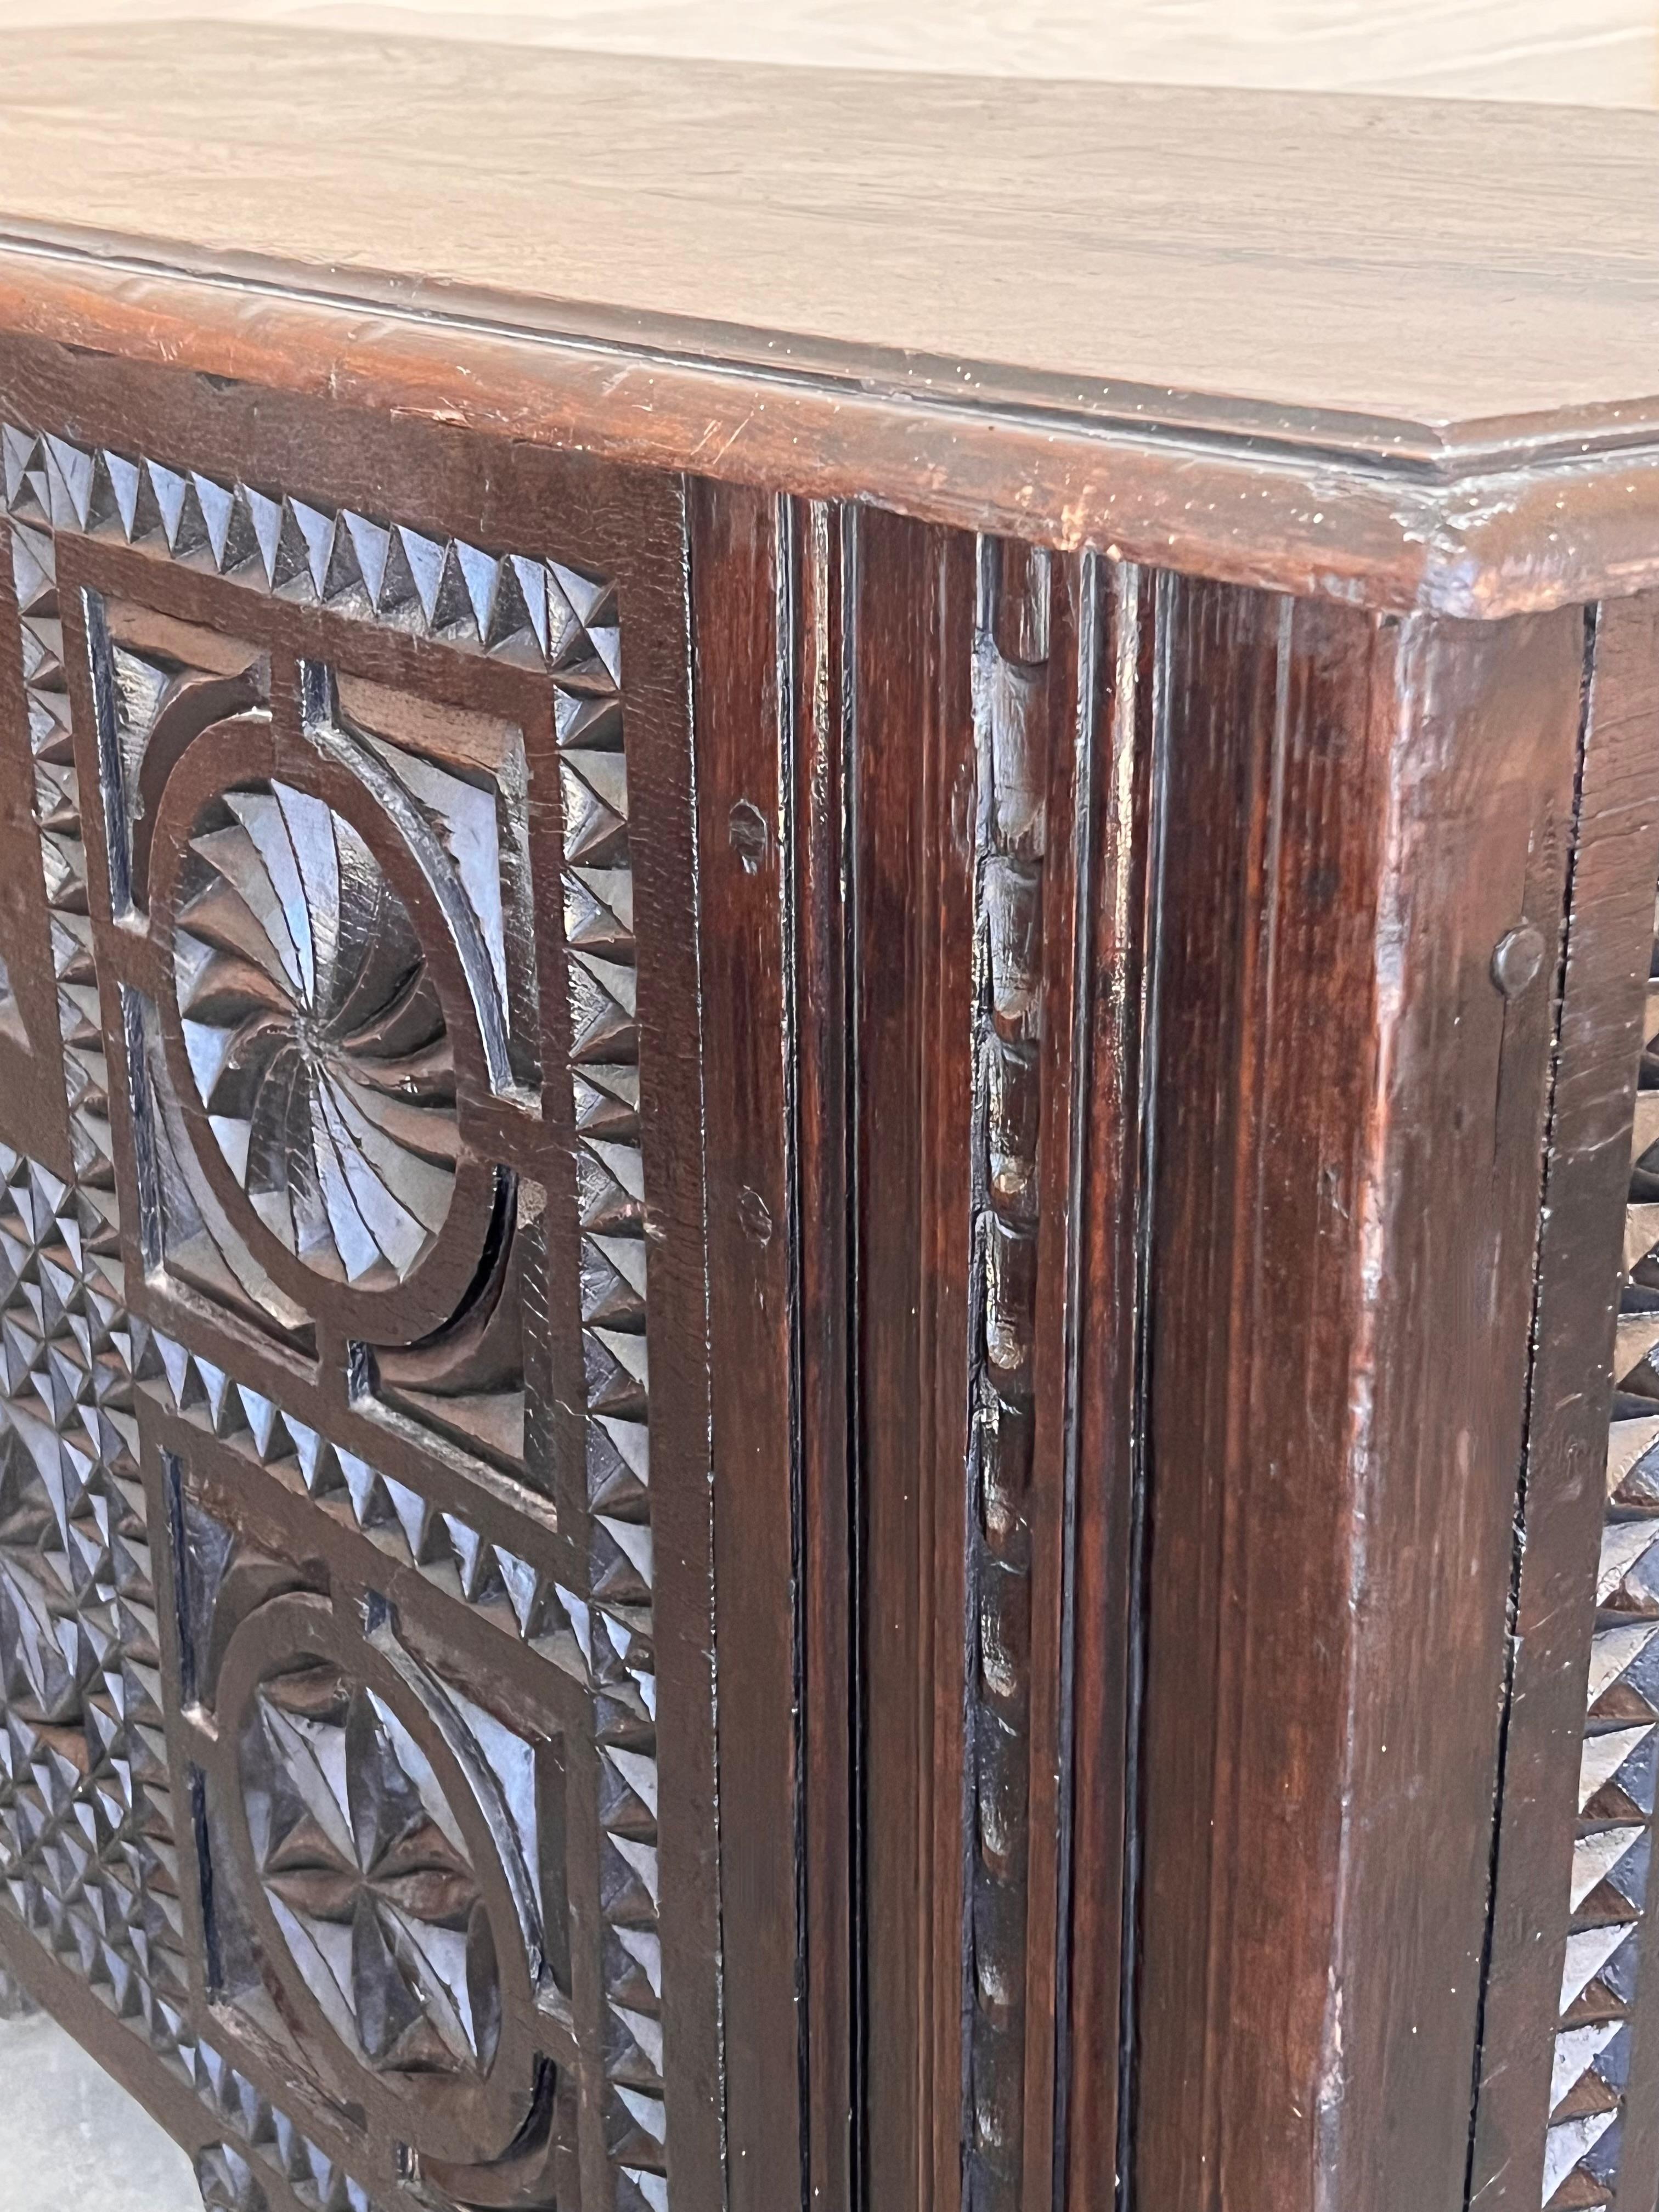 Antique Carved Walnut Large Kutxa Trunk from the Basque Country, Early 1800s For Sale 4